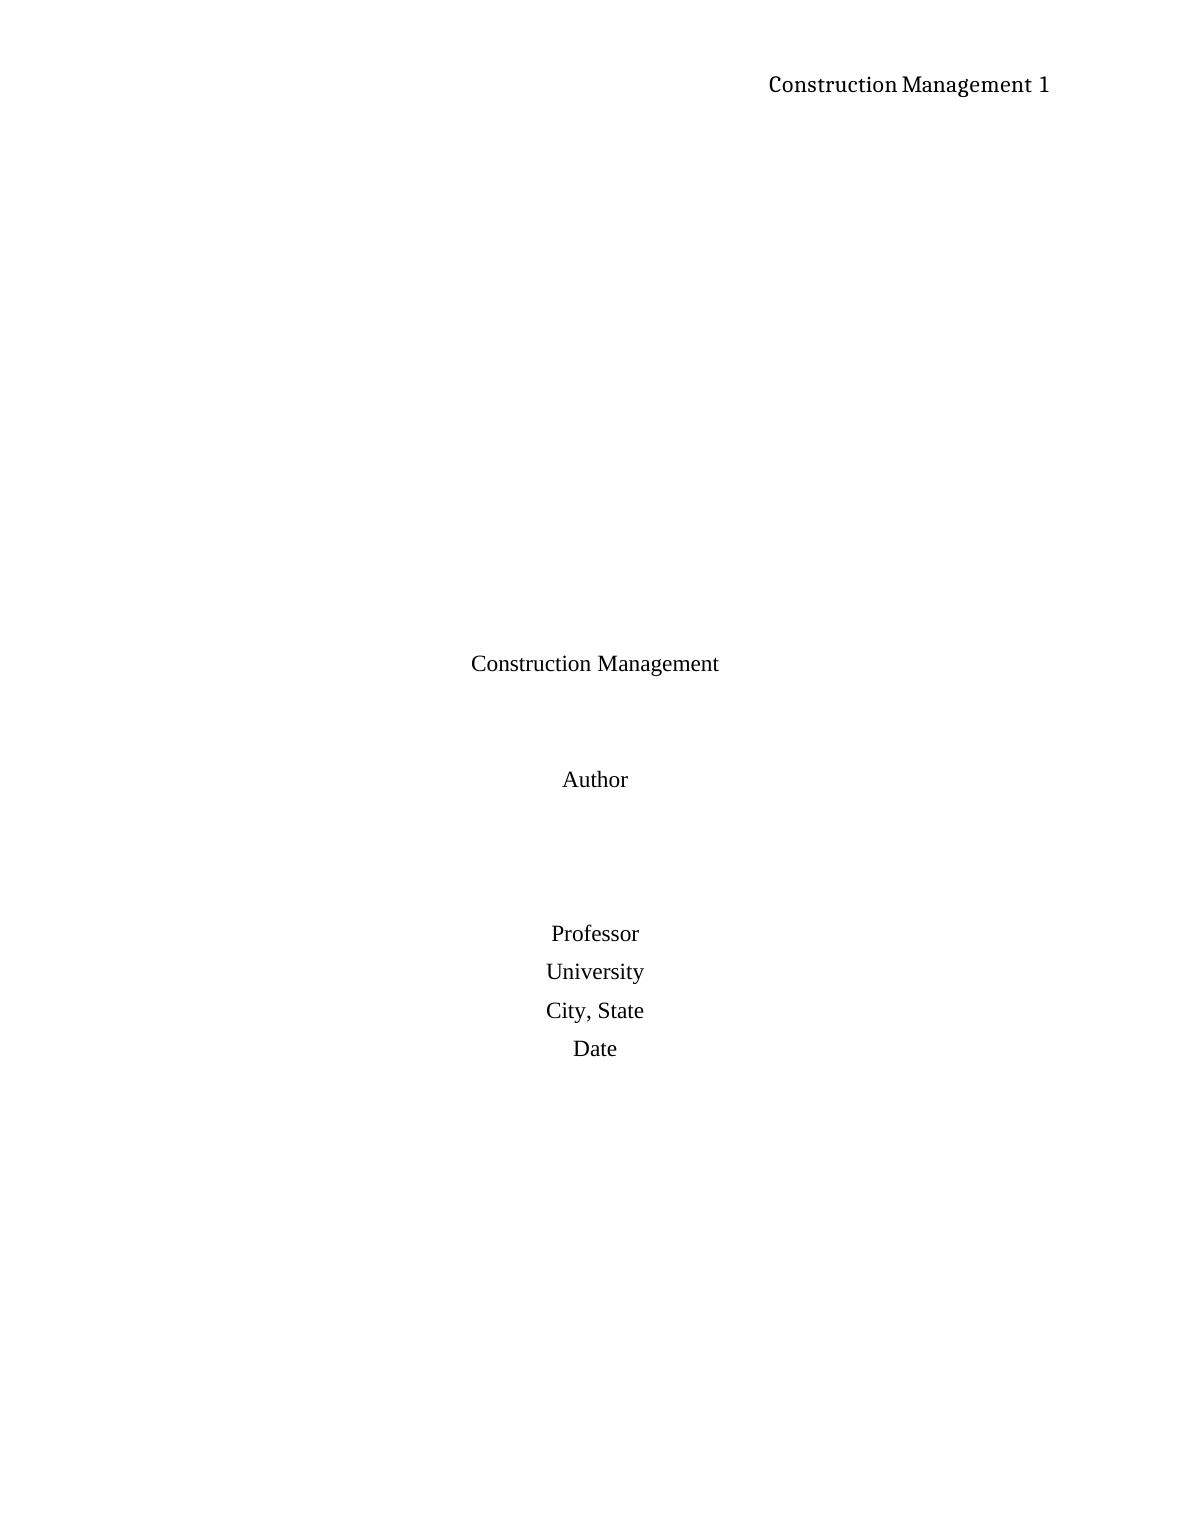 Construction Management Assignment | Tendering and Contract_1